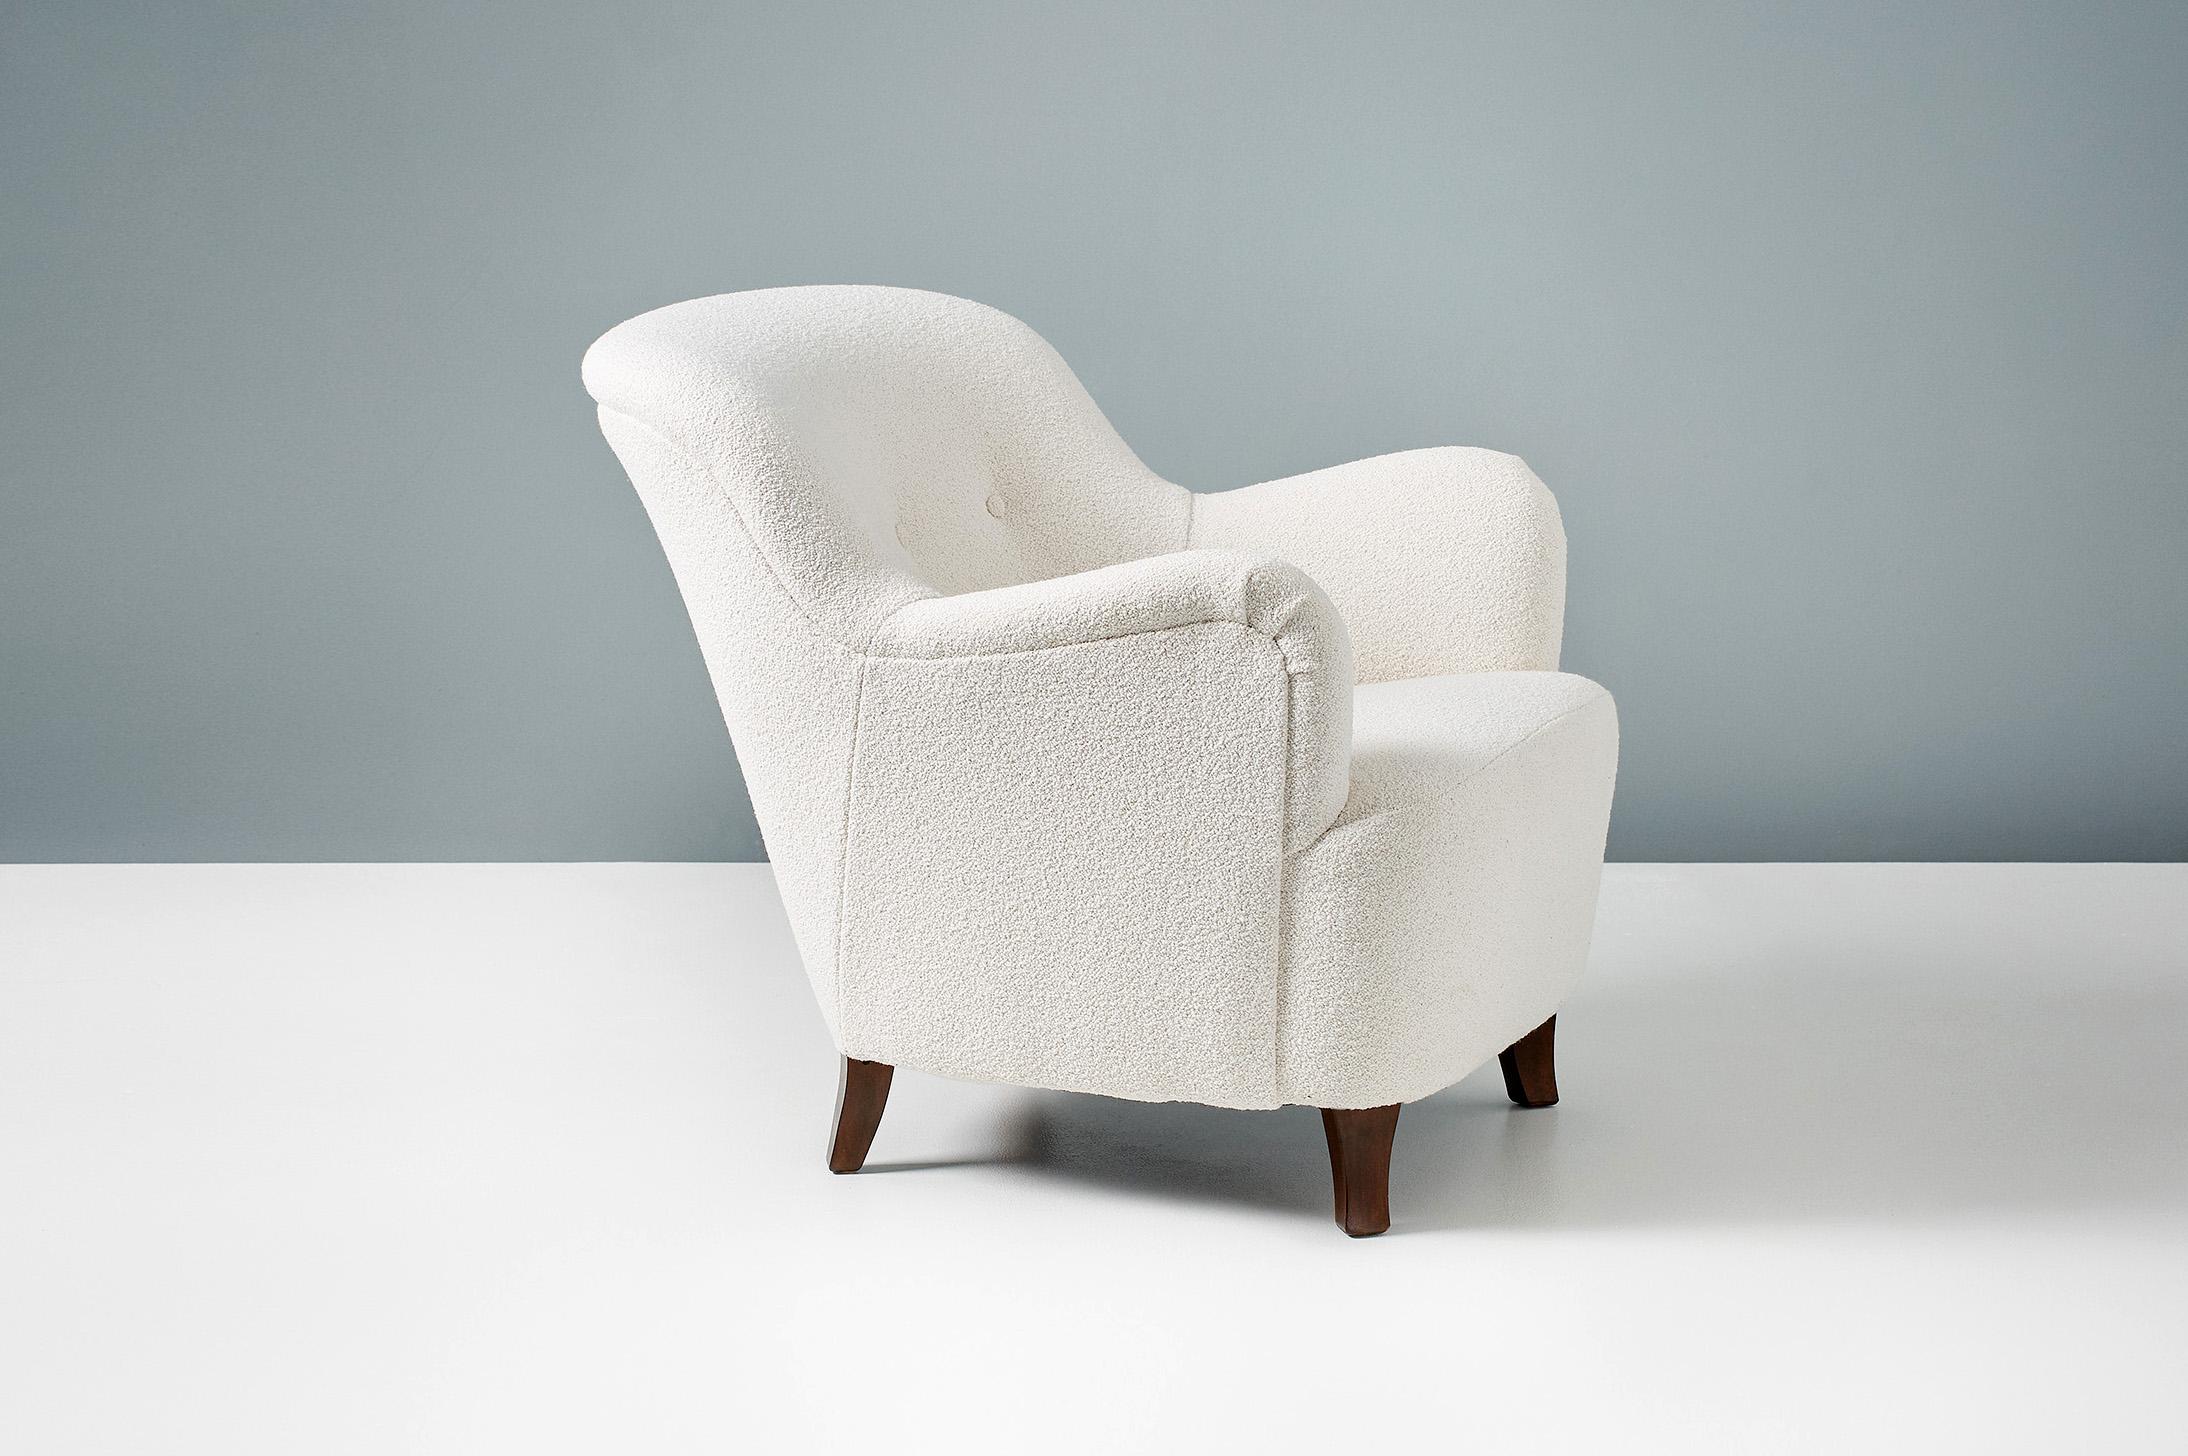 Dagmar Design - Elias Lounge Chairs

The Elias lounge chair is from our custom-made upholstered range. This piece has been developed and hand-made at our workshops in London using the highest quality materials. The frame is constructed from solid